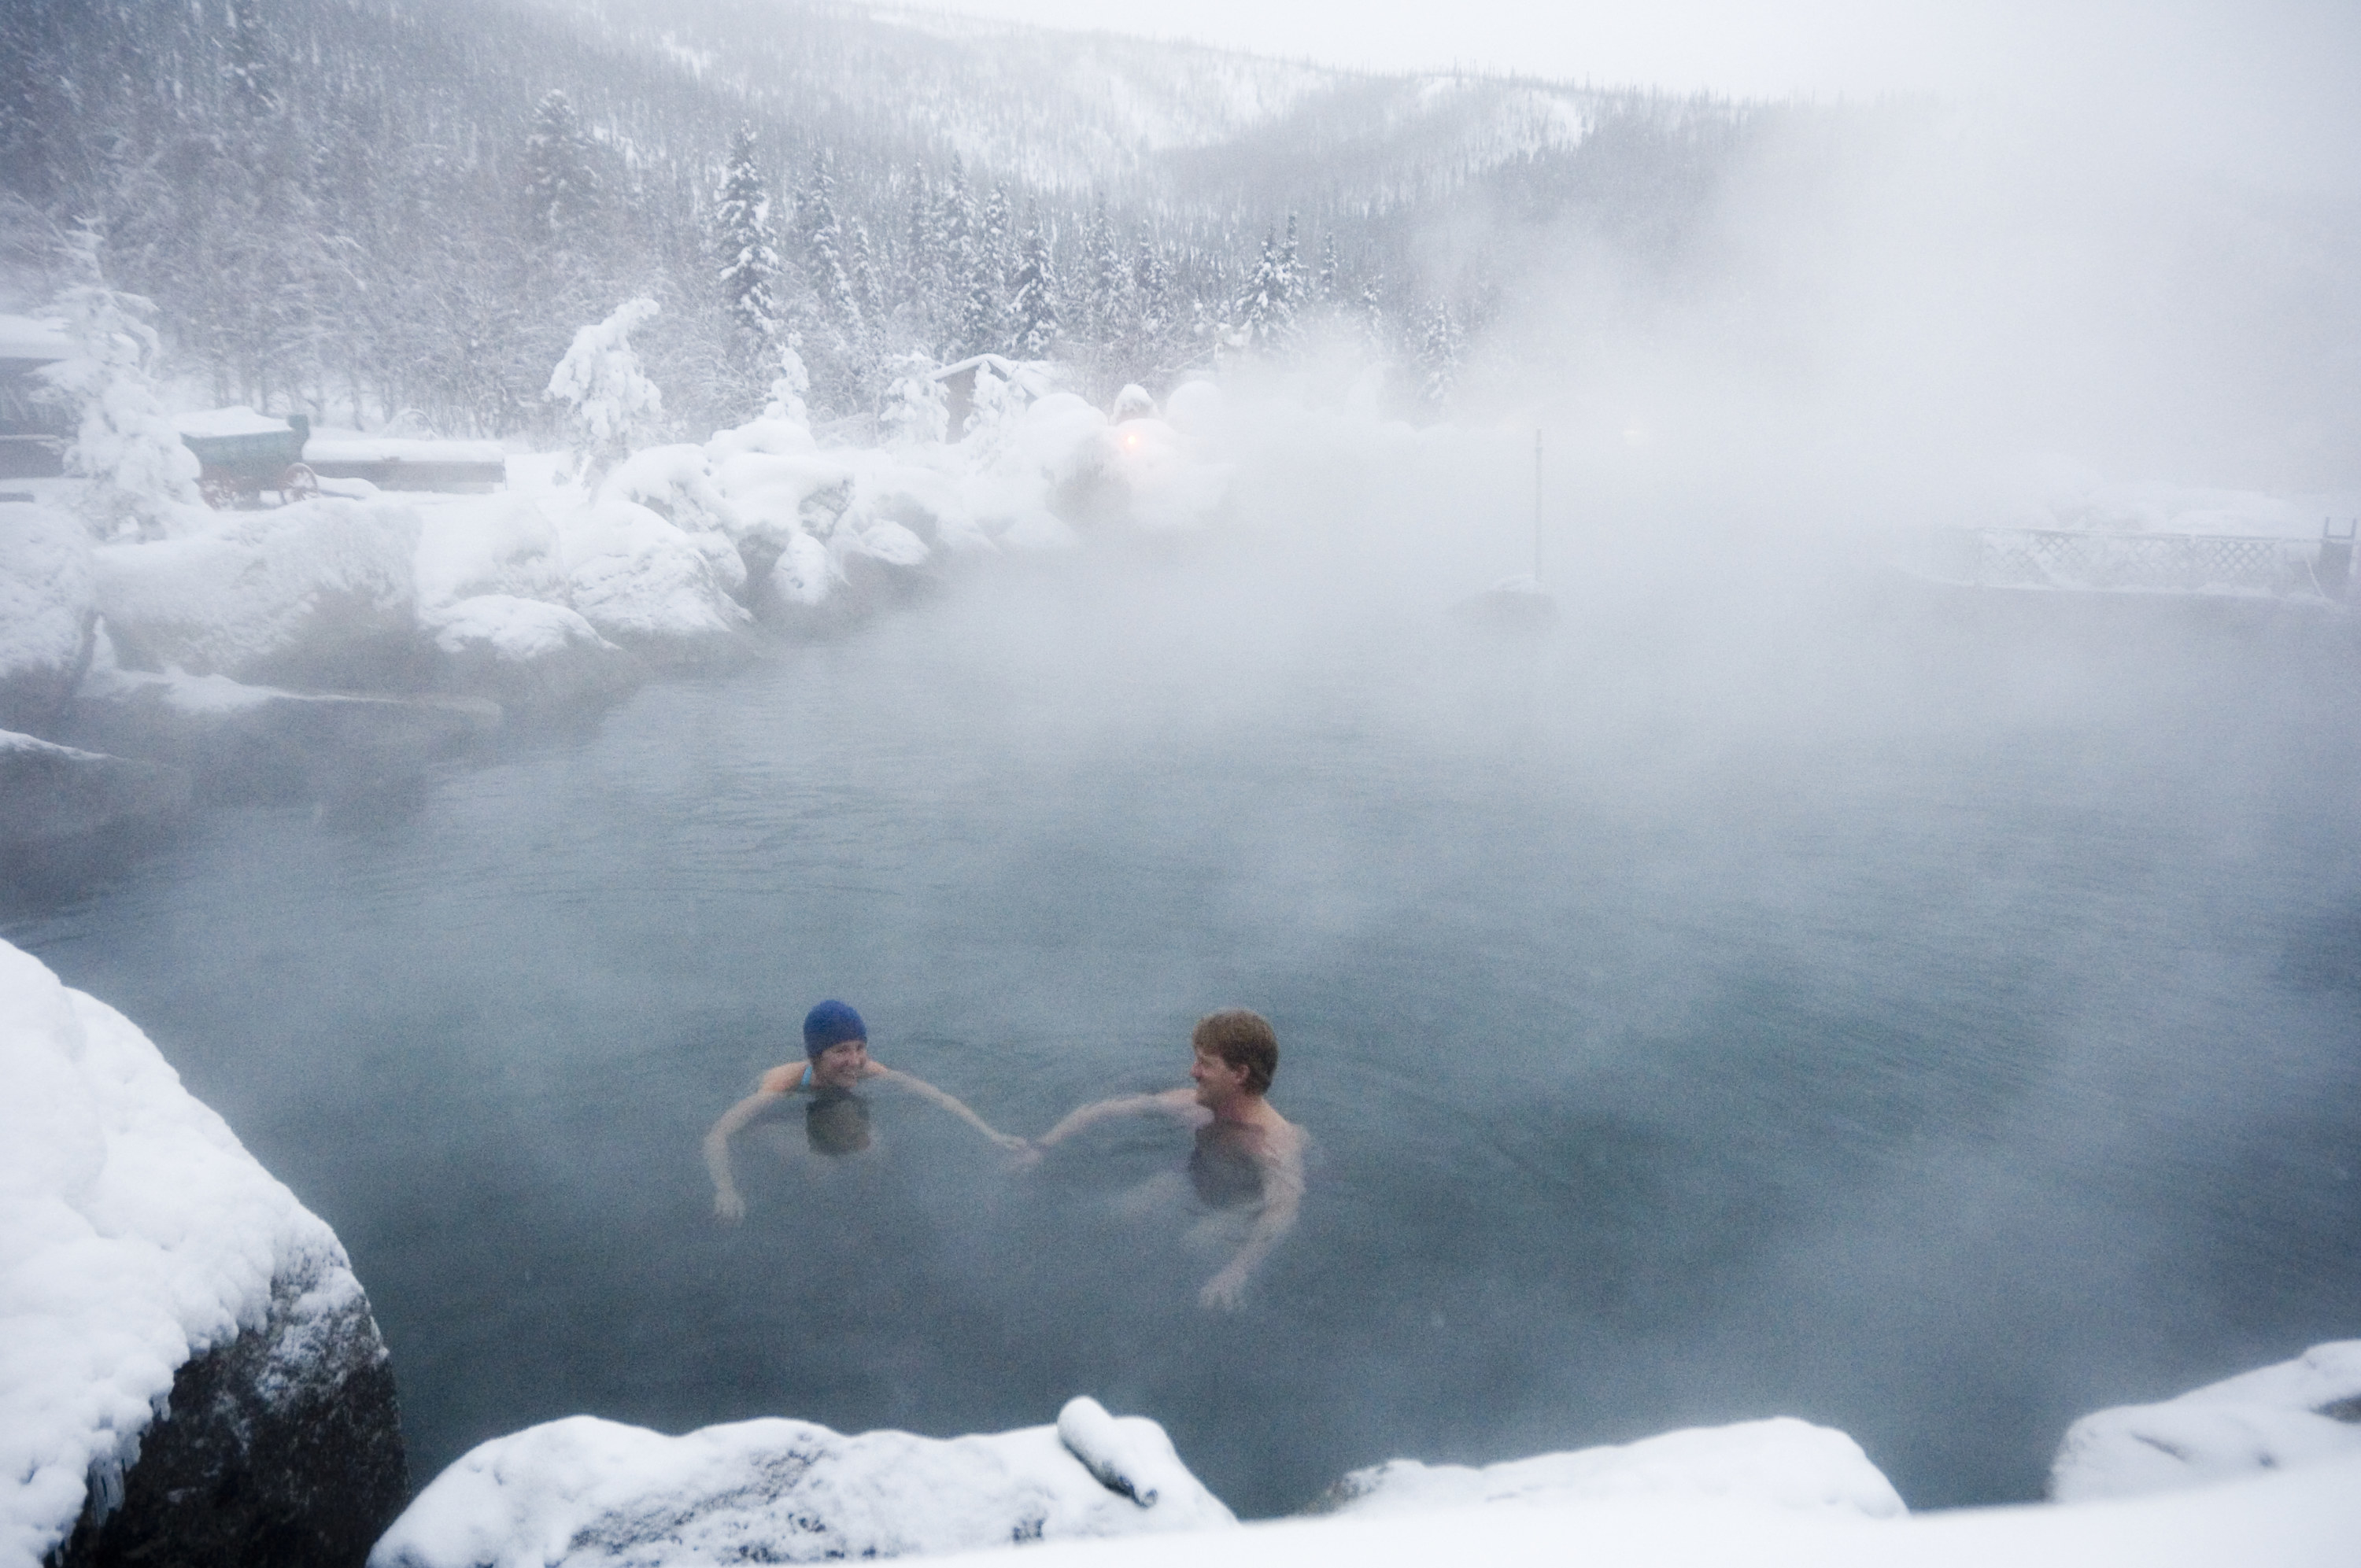 Two people swimming in a steamy outdoor pool surrounded by snow